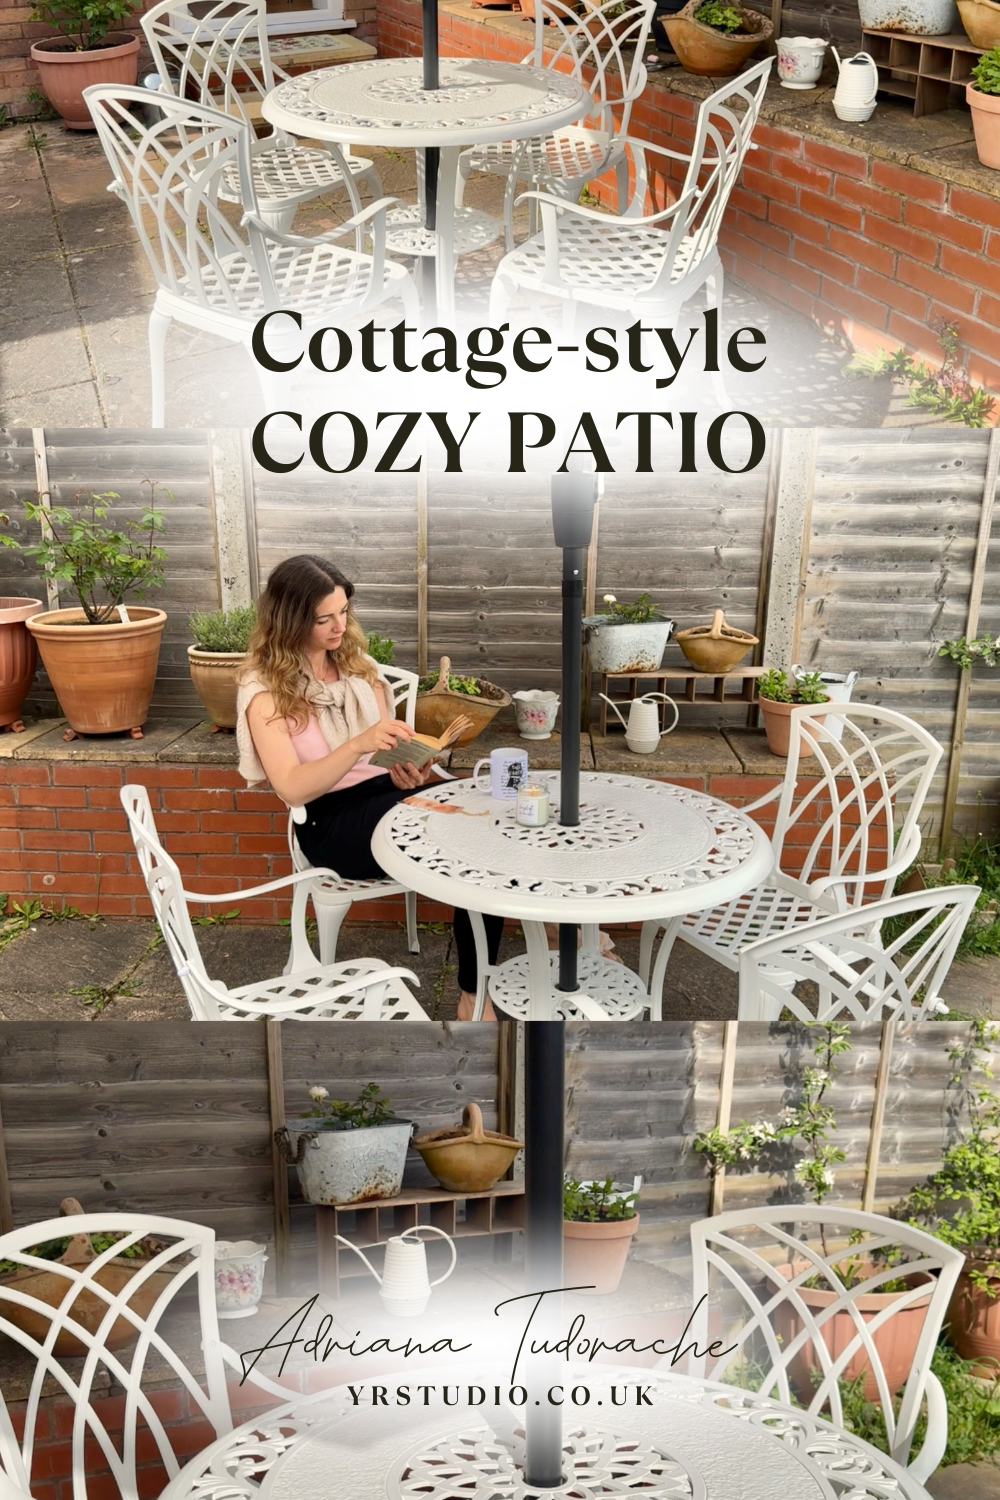 Transform Your Outdoor Space into a Cozy Cottage-Style Patio - Decor Ideas